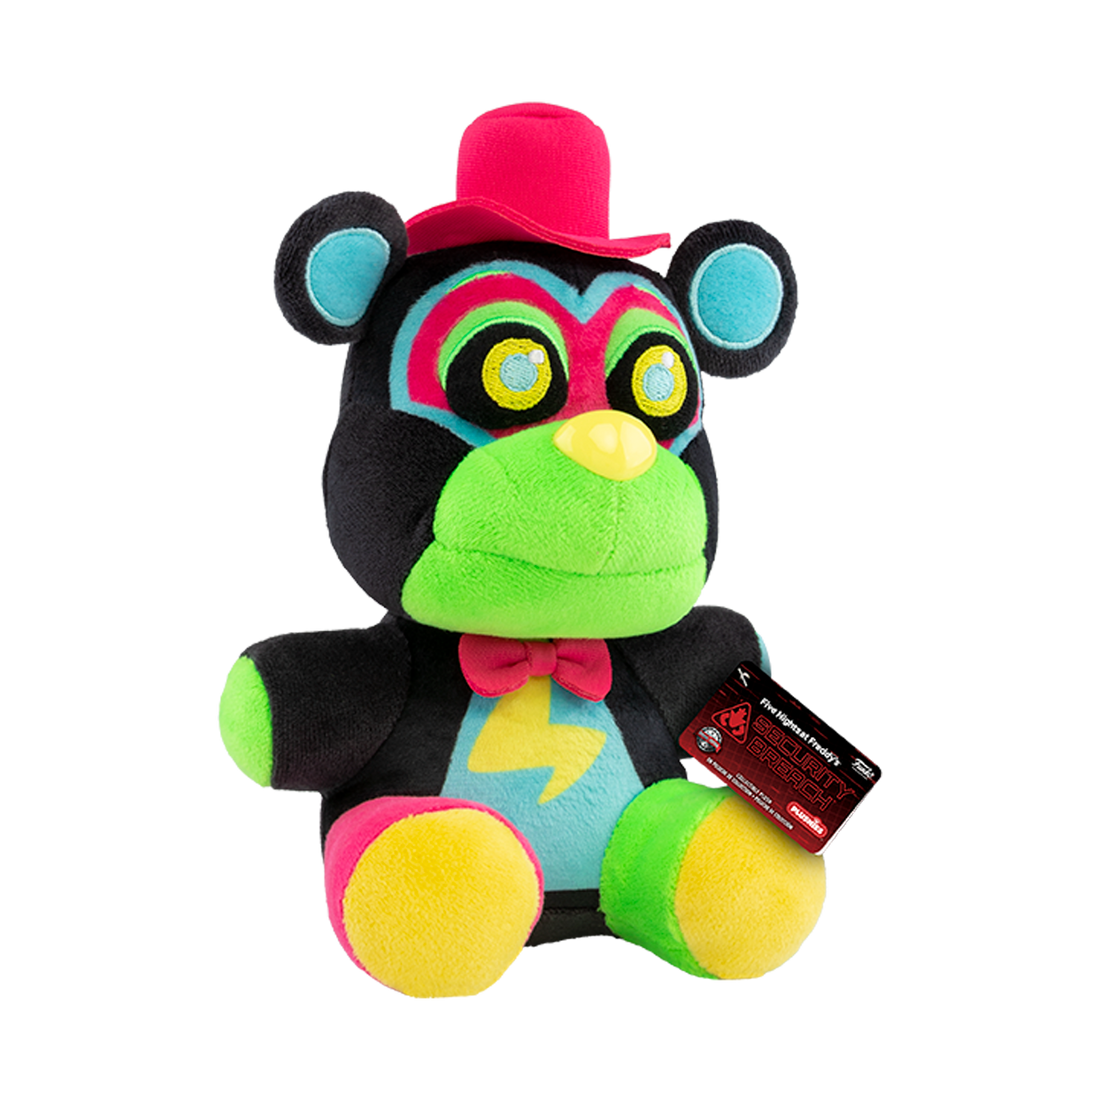 Funko Five Nights at Freddy's Security Breach Plush (Styles May